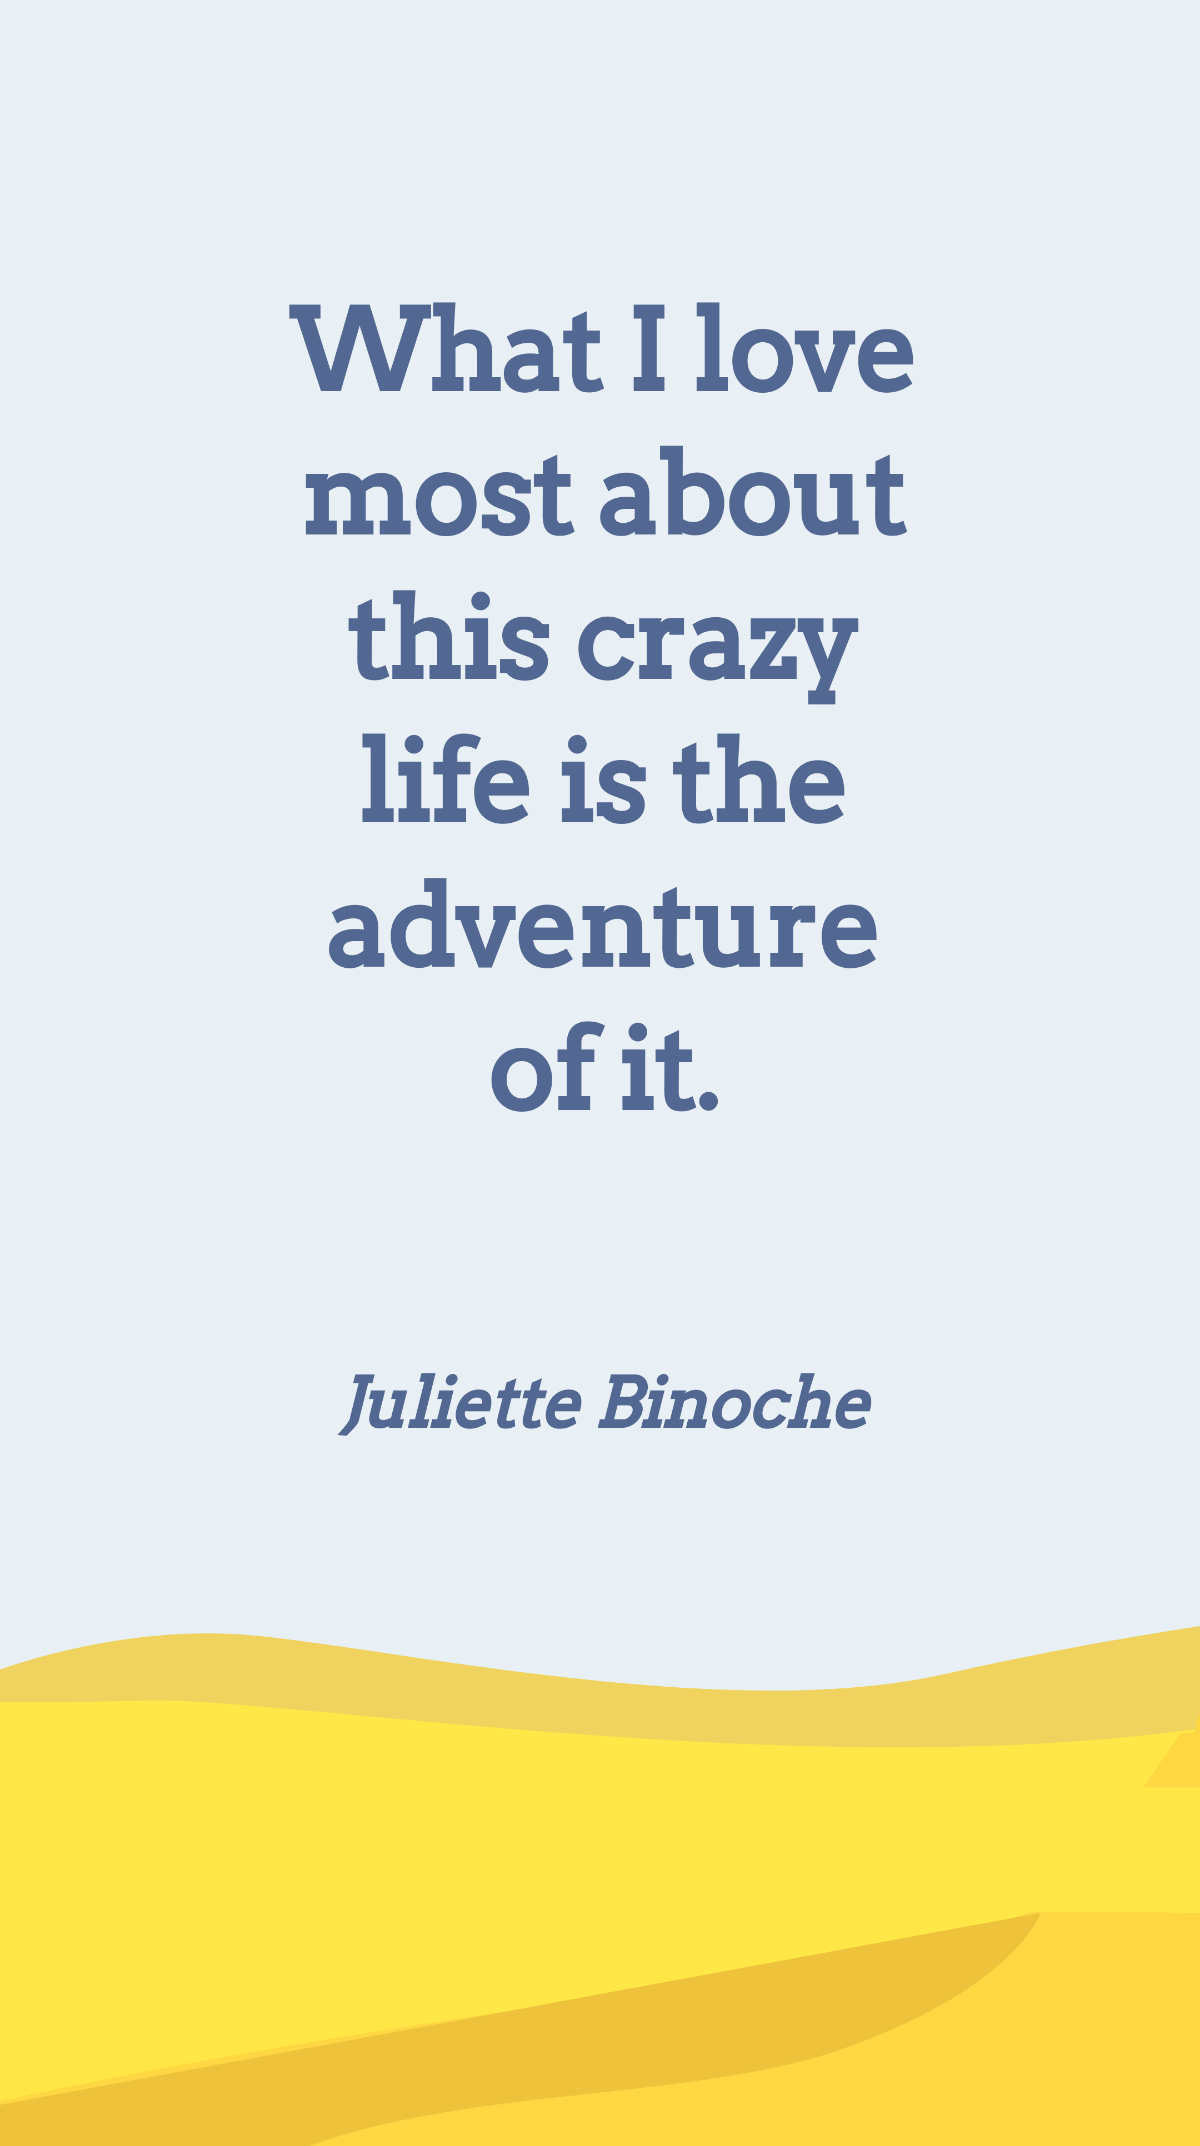 Free Juliette Binoche - What I love most about this crazy life is the adventure of it. Template